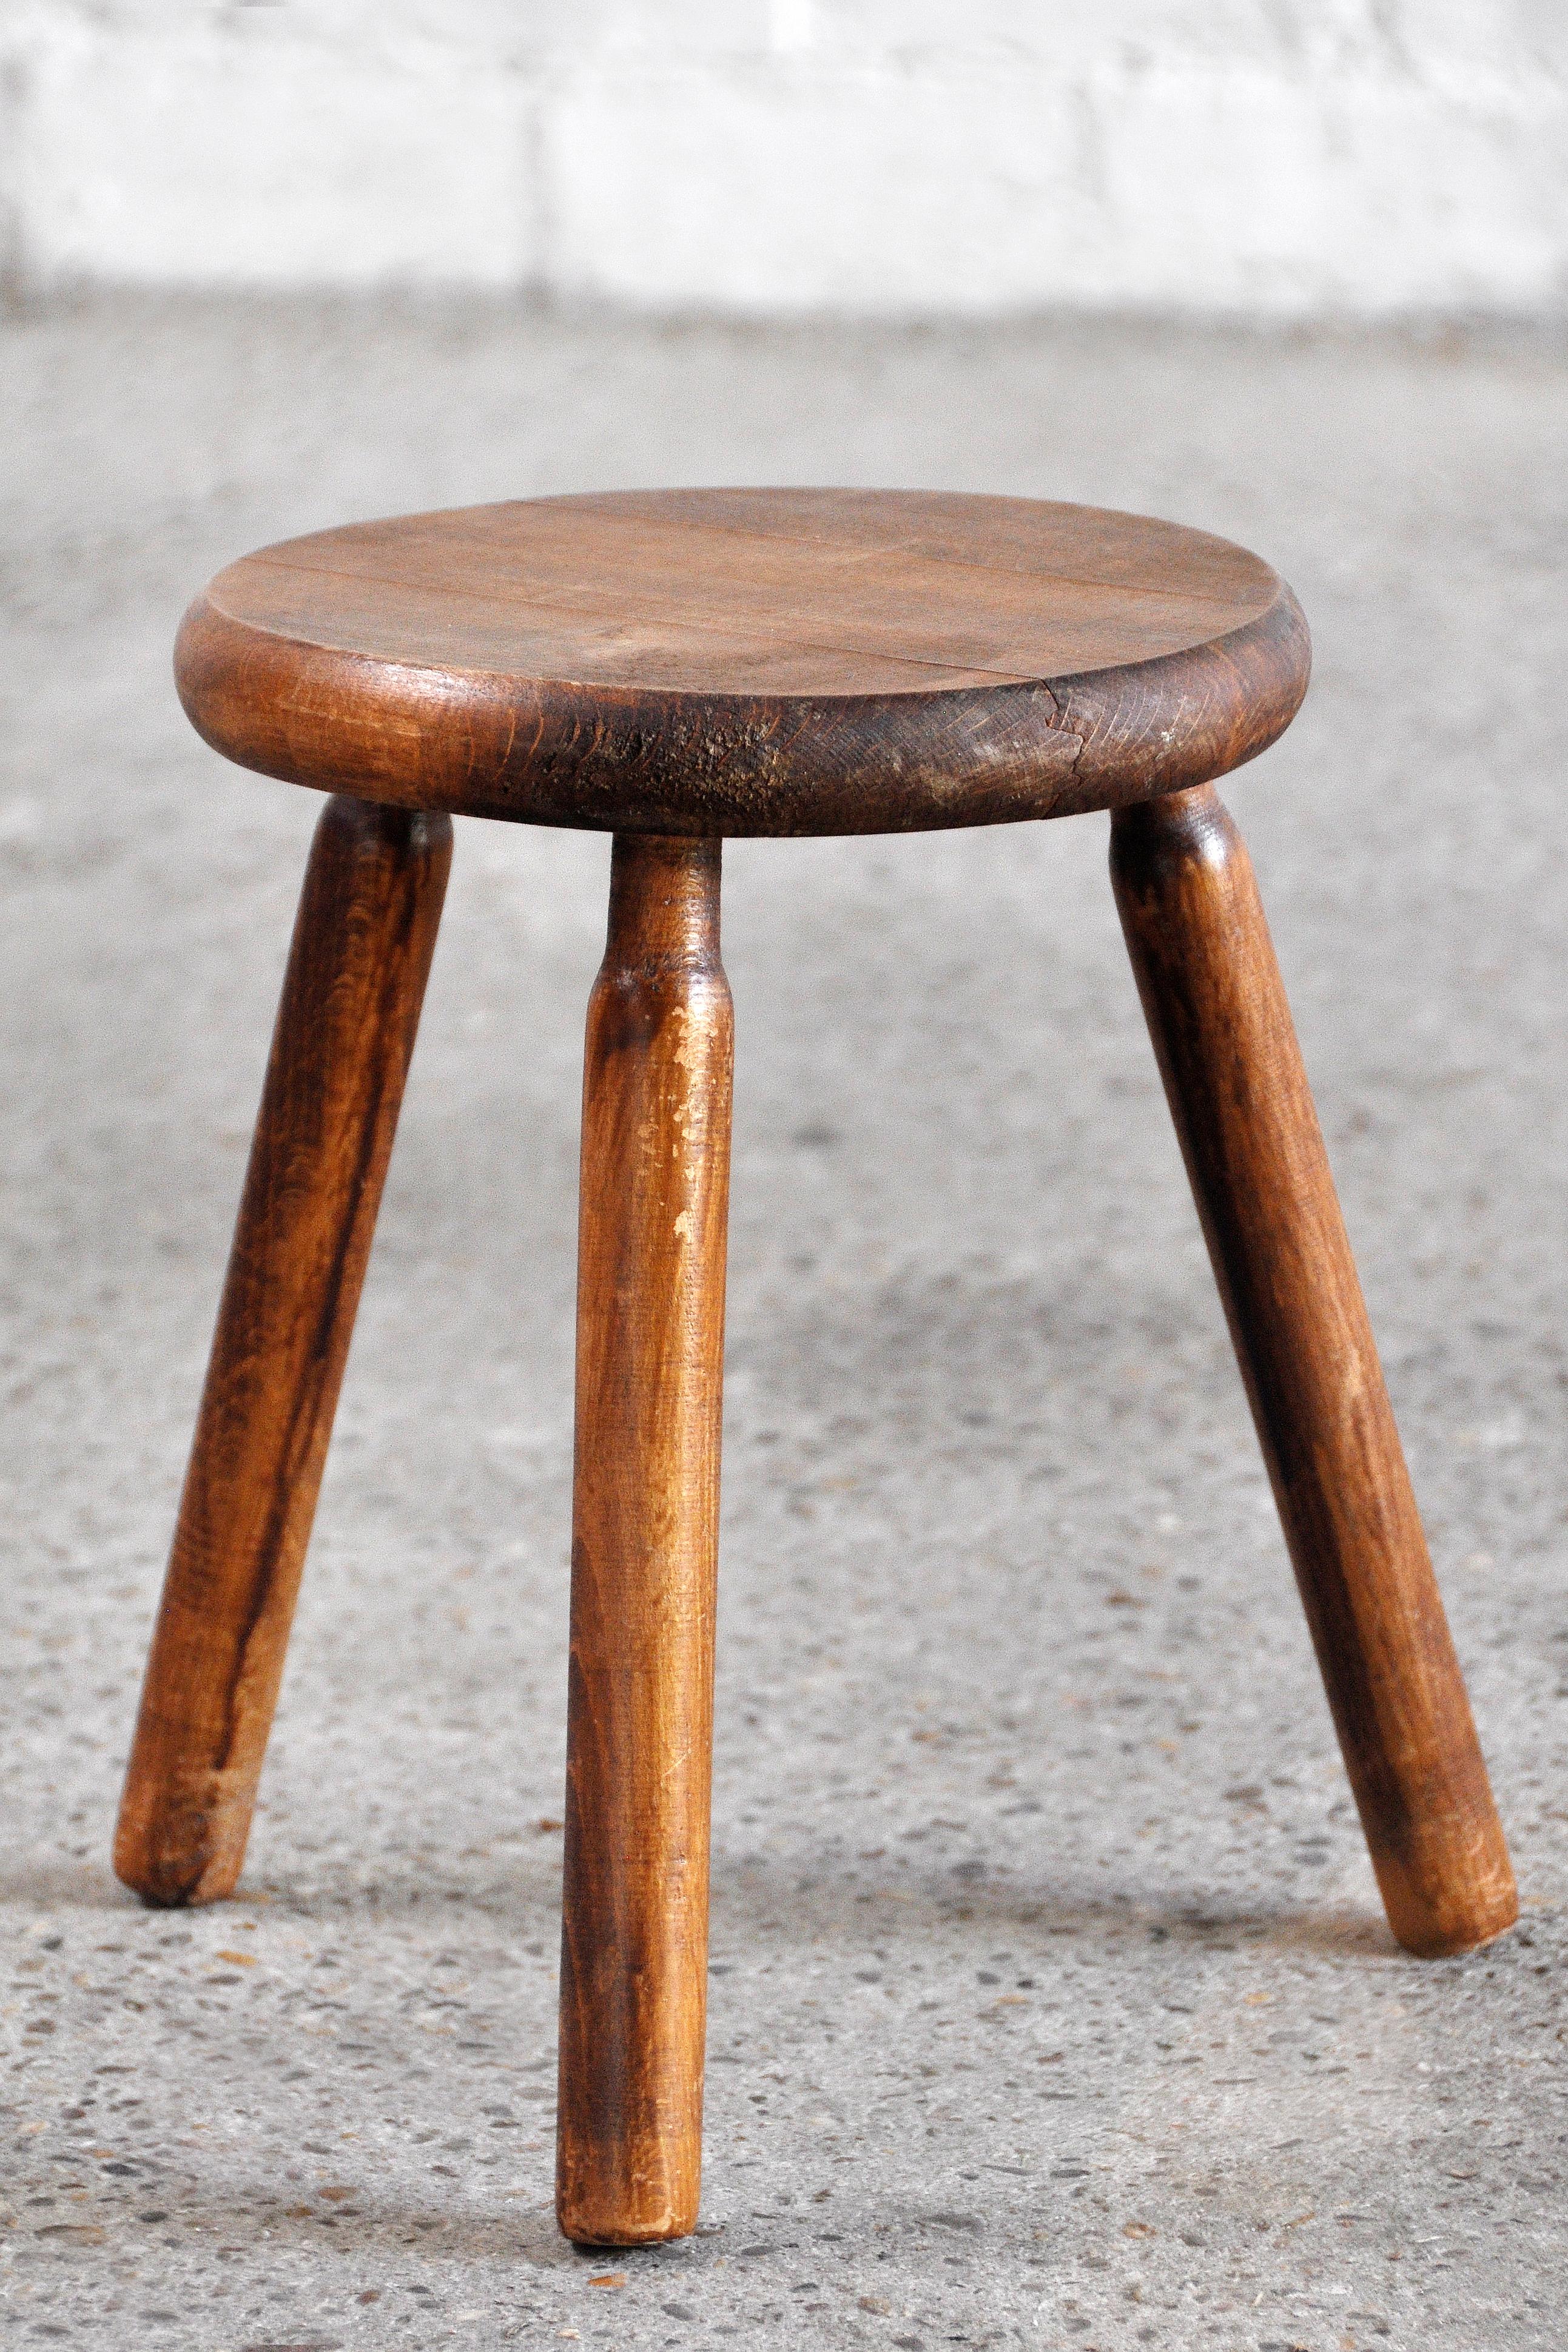 Vintage Stool in the Manner of Charlotte Perriand, France, Mid-20th Century In Good Condition For Sale In Zwijndrecht, Antwerp